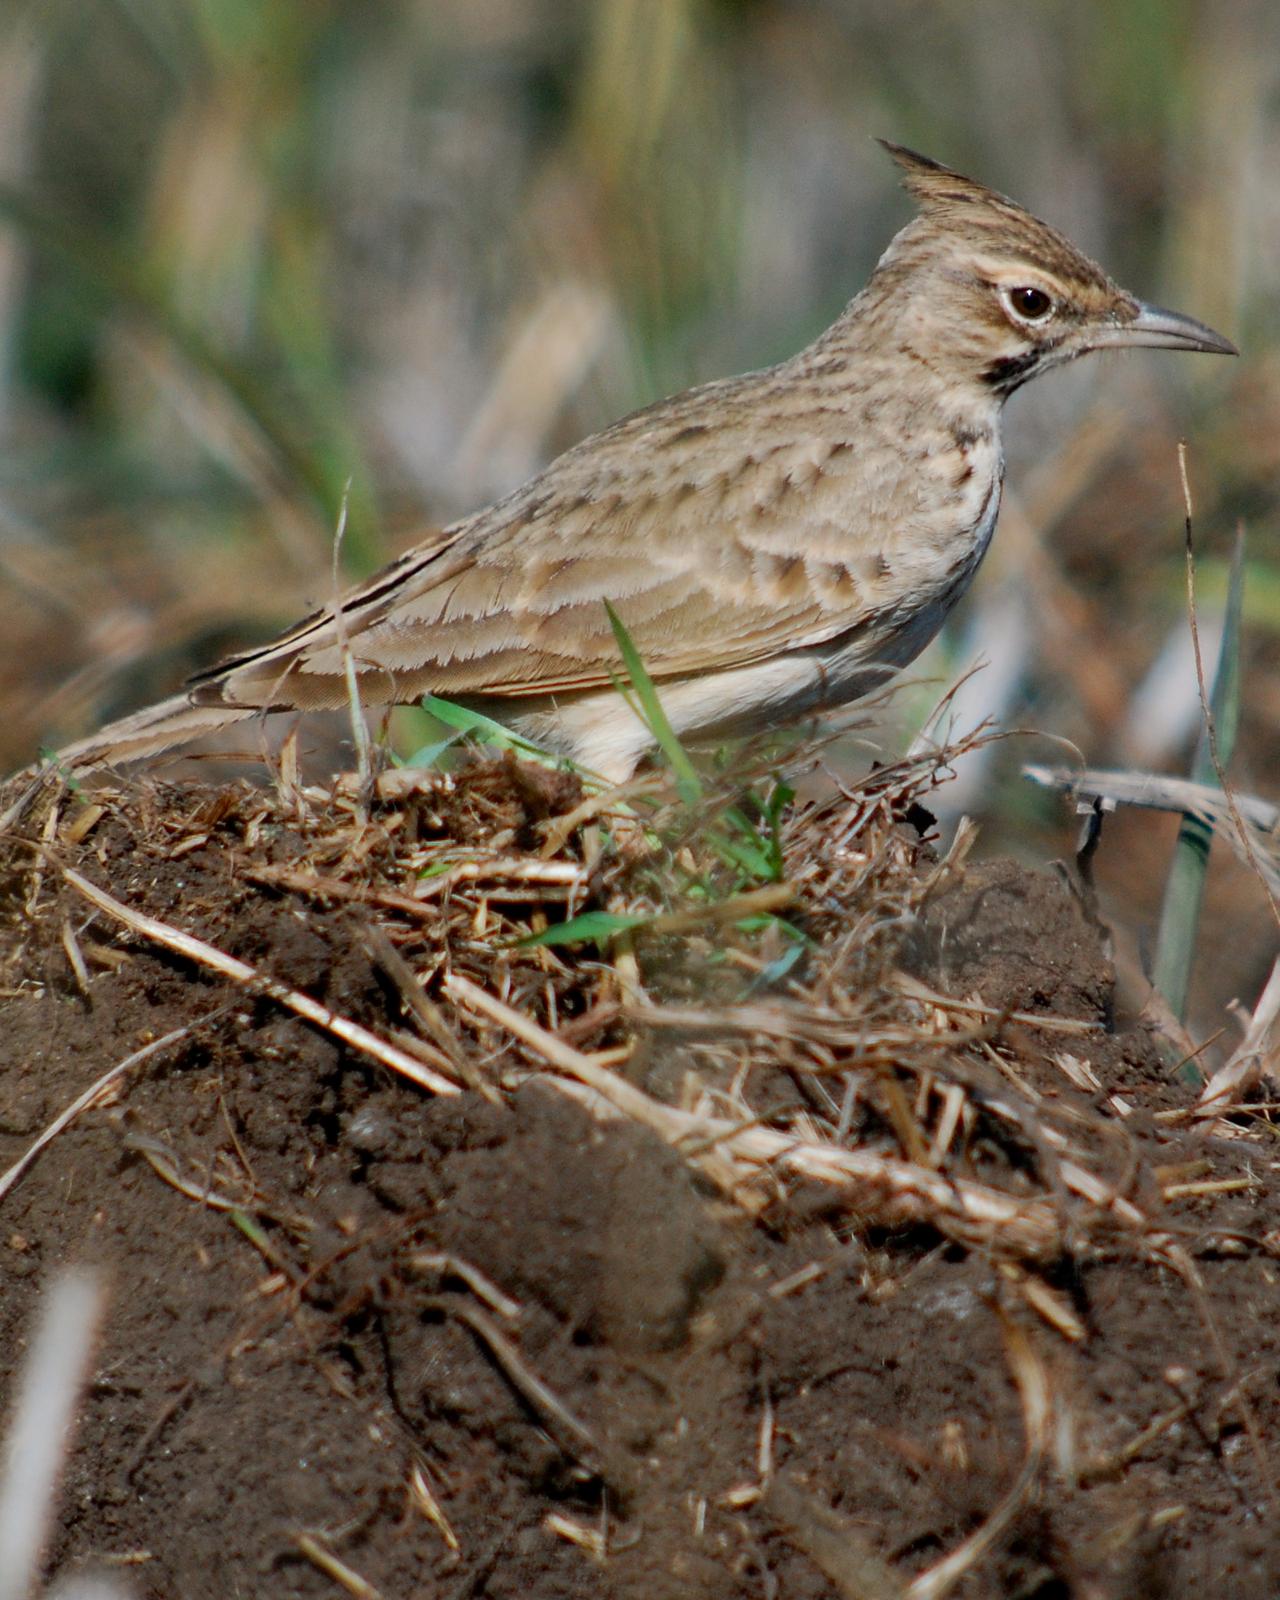 Crested/Maghreb Lark Photo by Birdchick.com